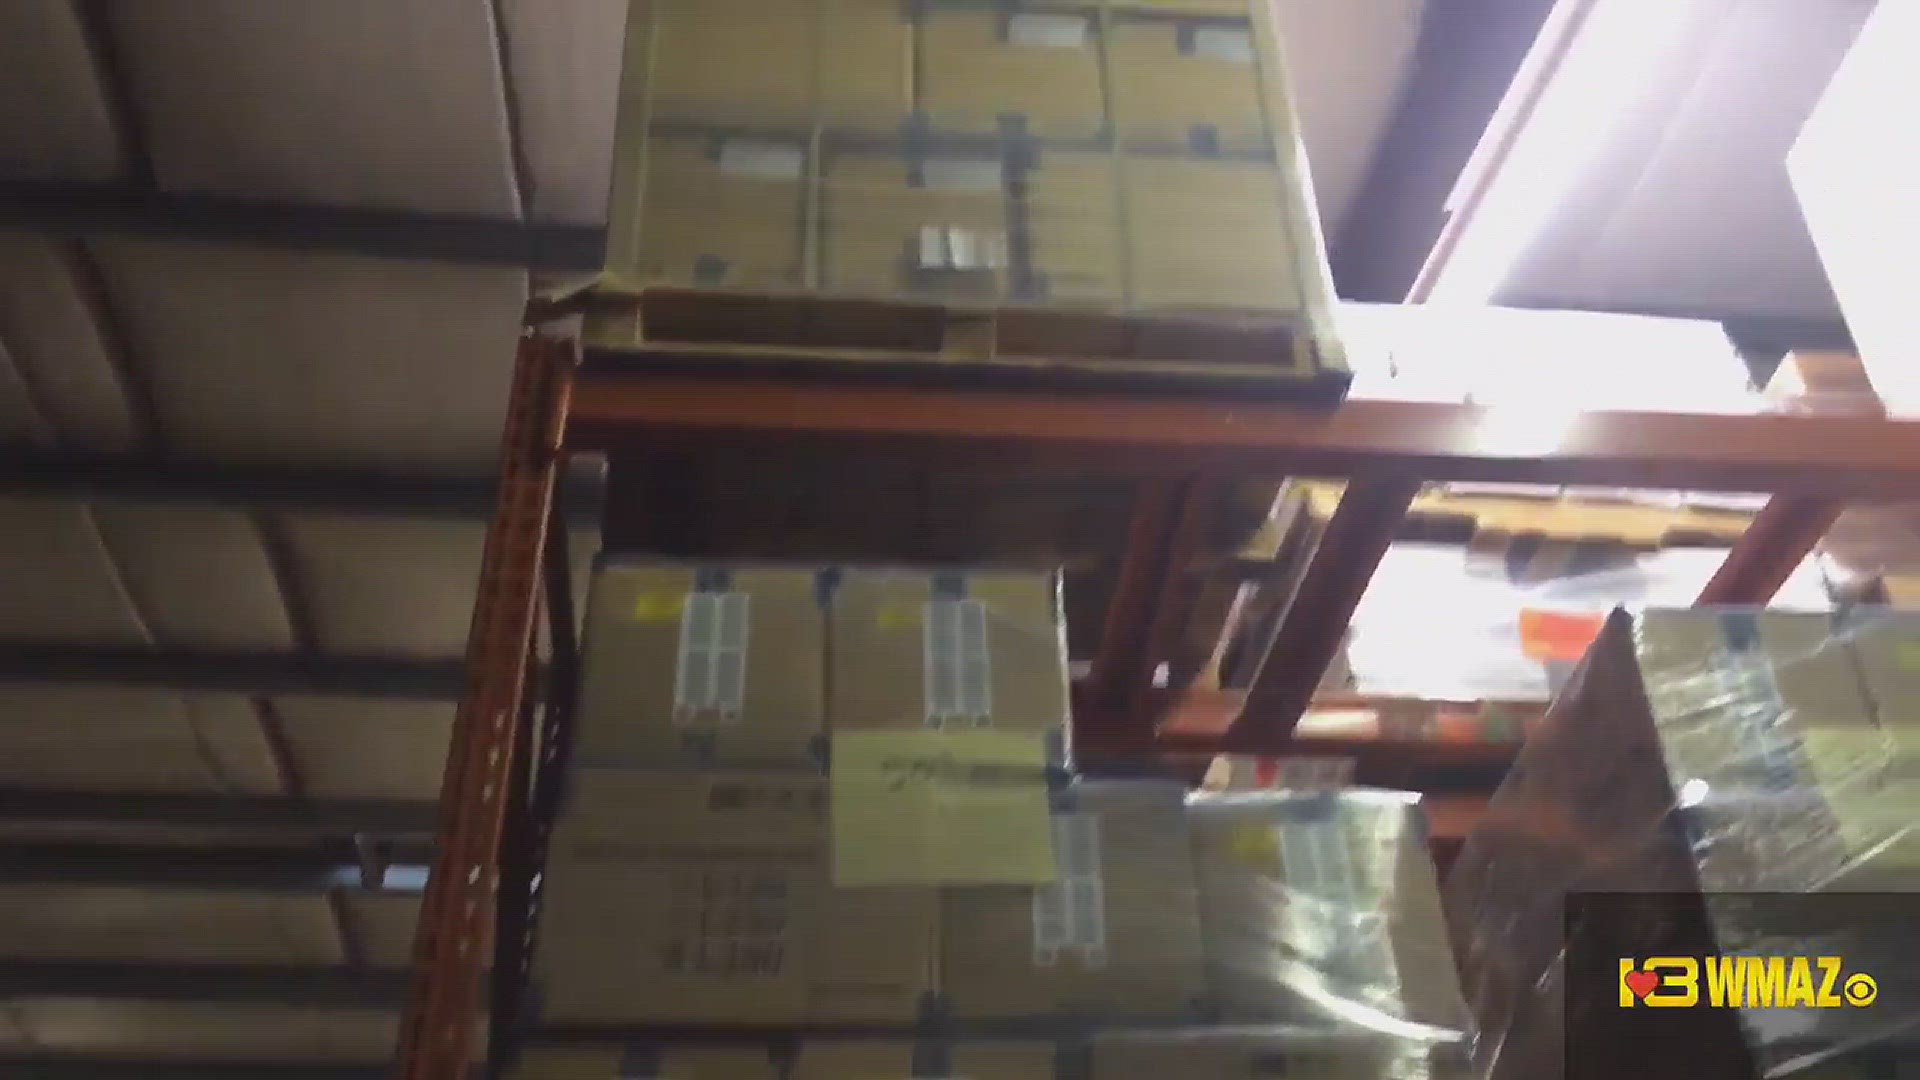 The Bibb County school district purchased these 15,000 computers for $3.7 million in 2012. 13WMAZ's Justin McDuffie shot this video Friday afternoon of the unused machines in the district's warehouse.